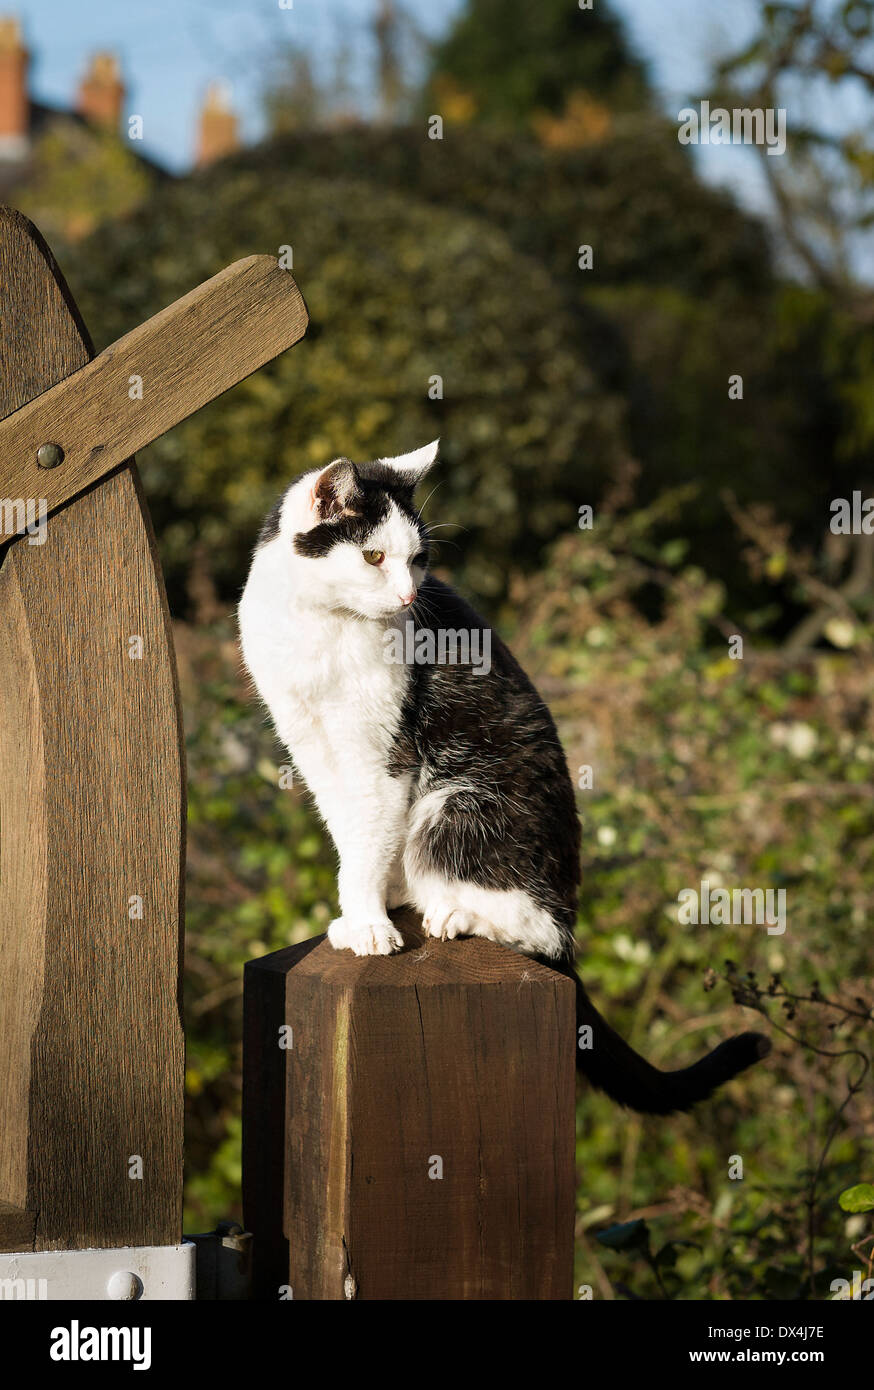 Black and white cat on gate post waiting and watching Stock Photo